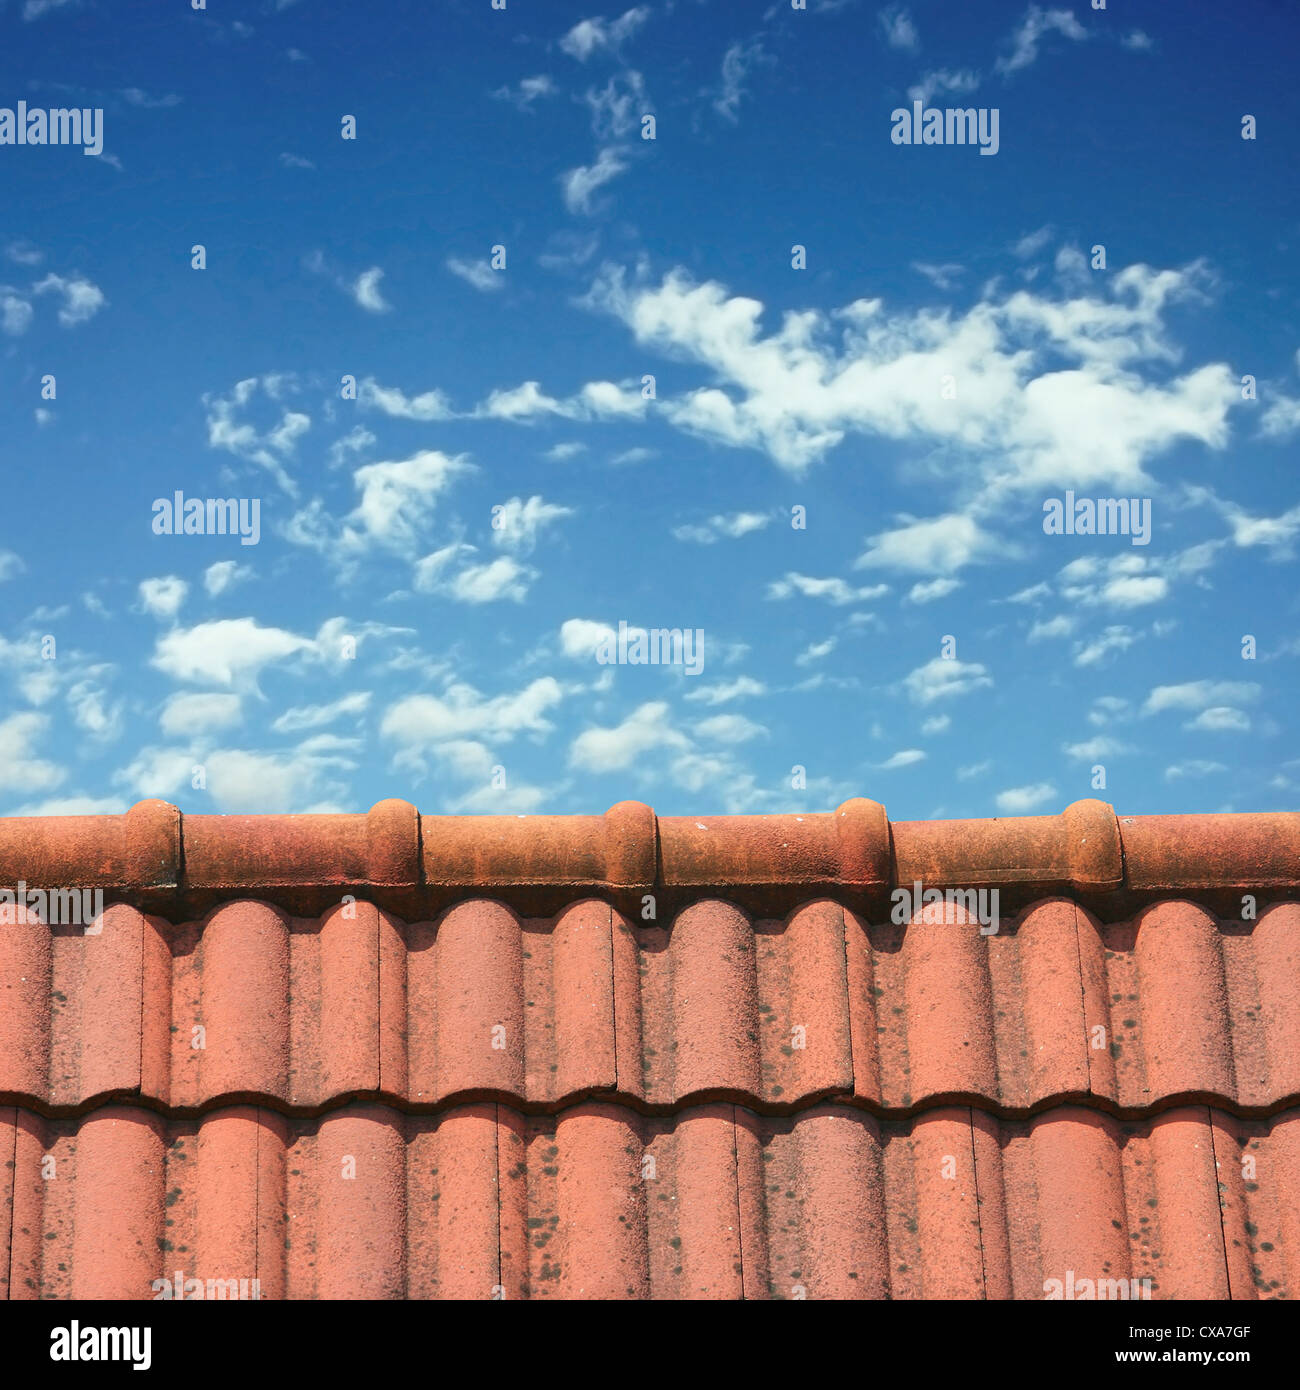 A Roof Top with Red Tiles and Blue Sky Stock Photo